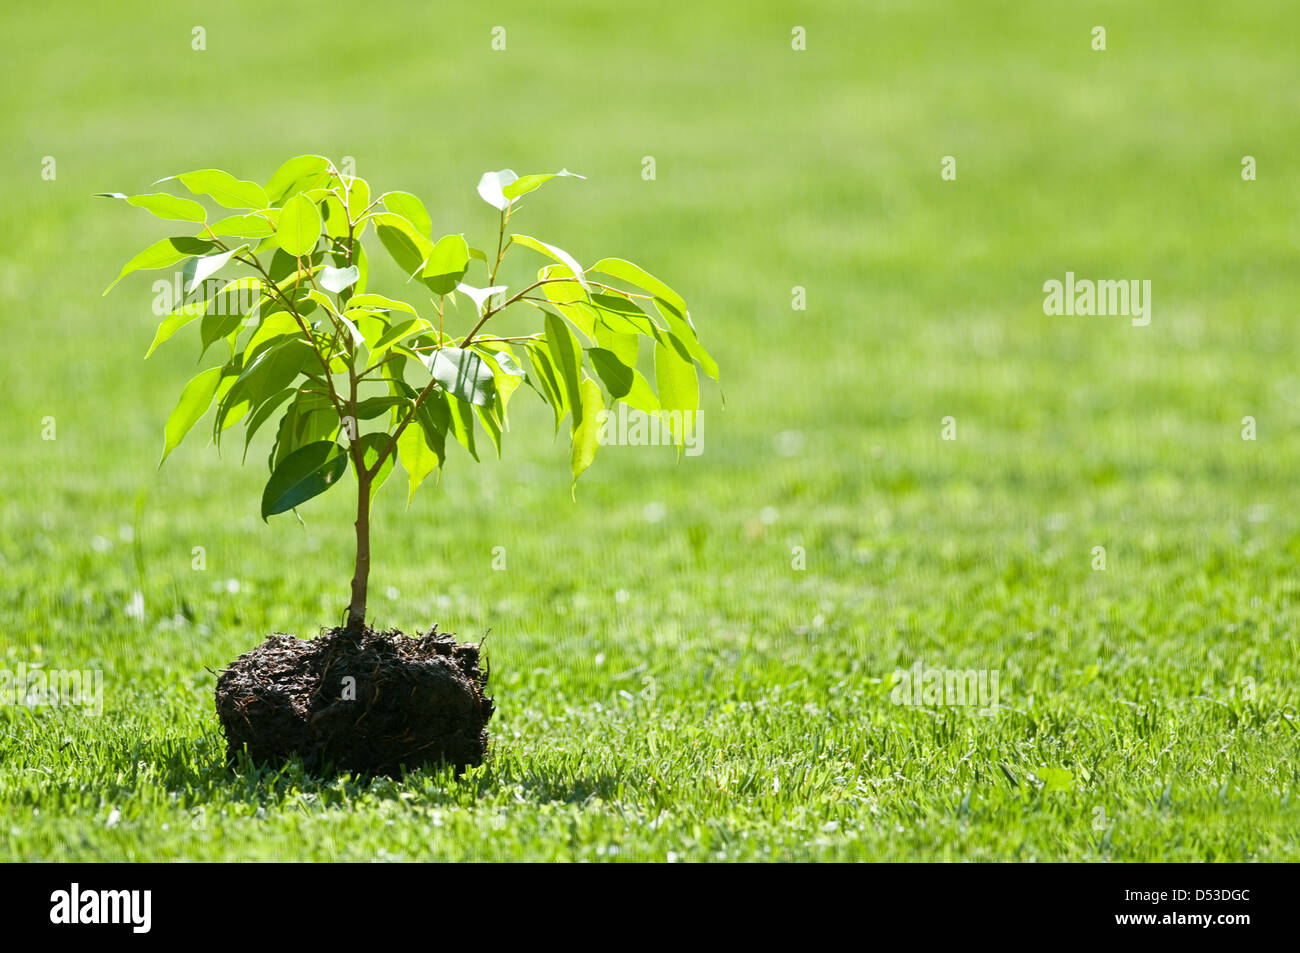 small tree on green lawn Stock Photo